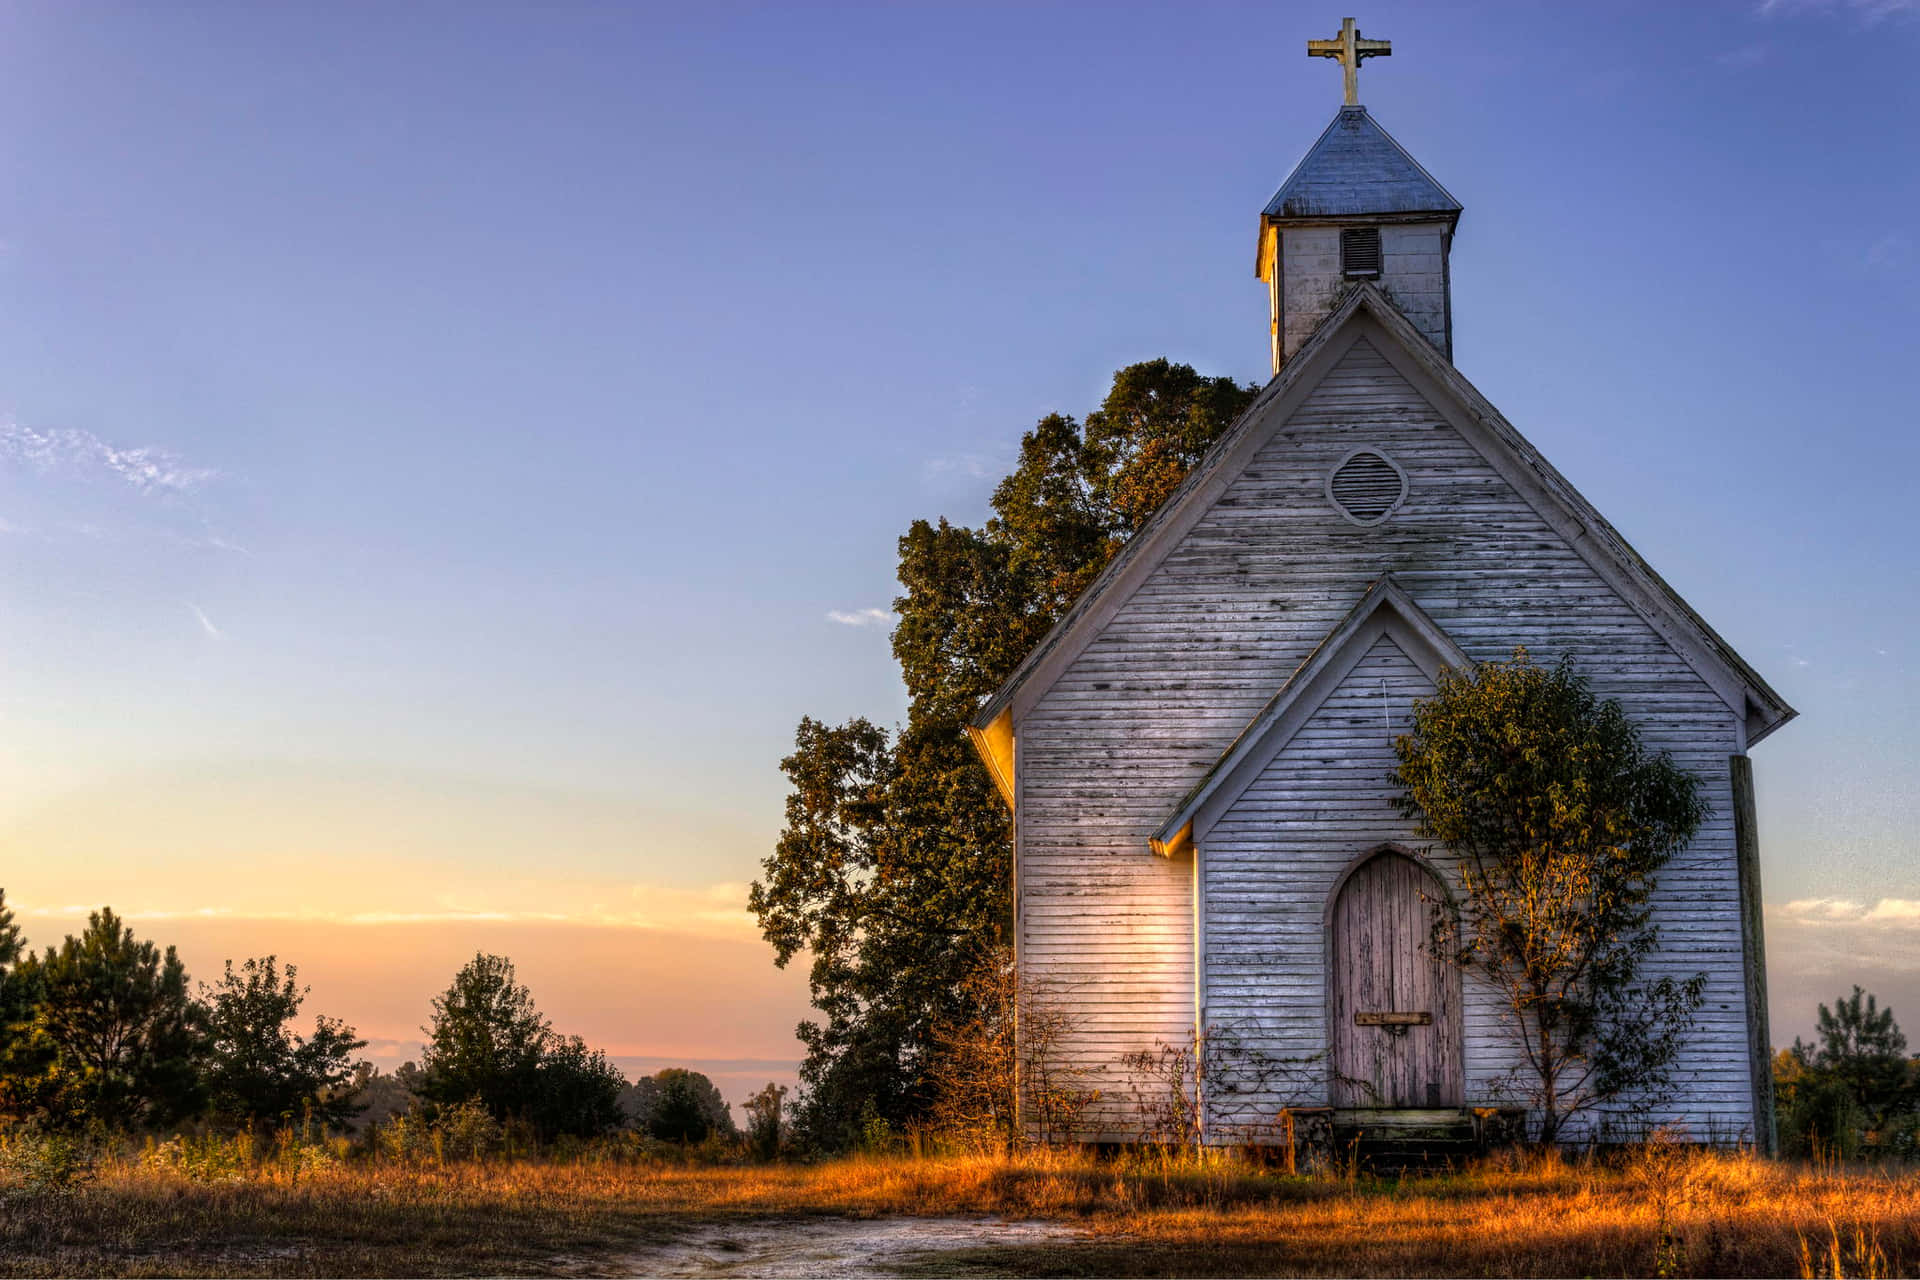 a gorgeous view of a vibrant, sunlit church